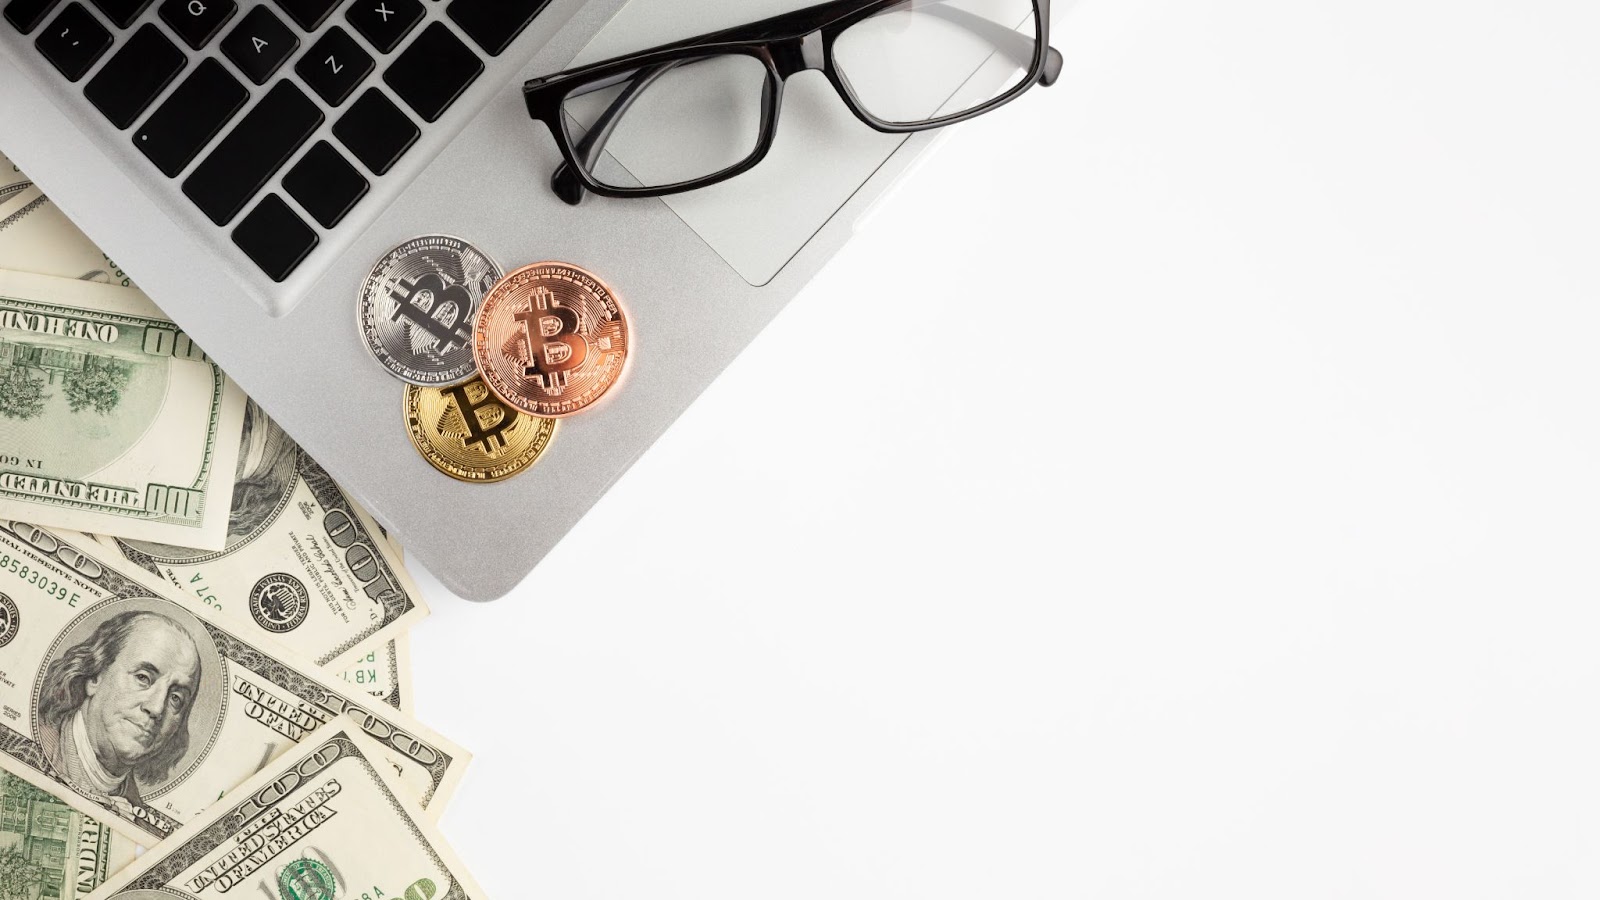 laptop-with-eye-glasses-coins-money